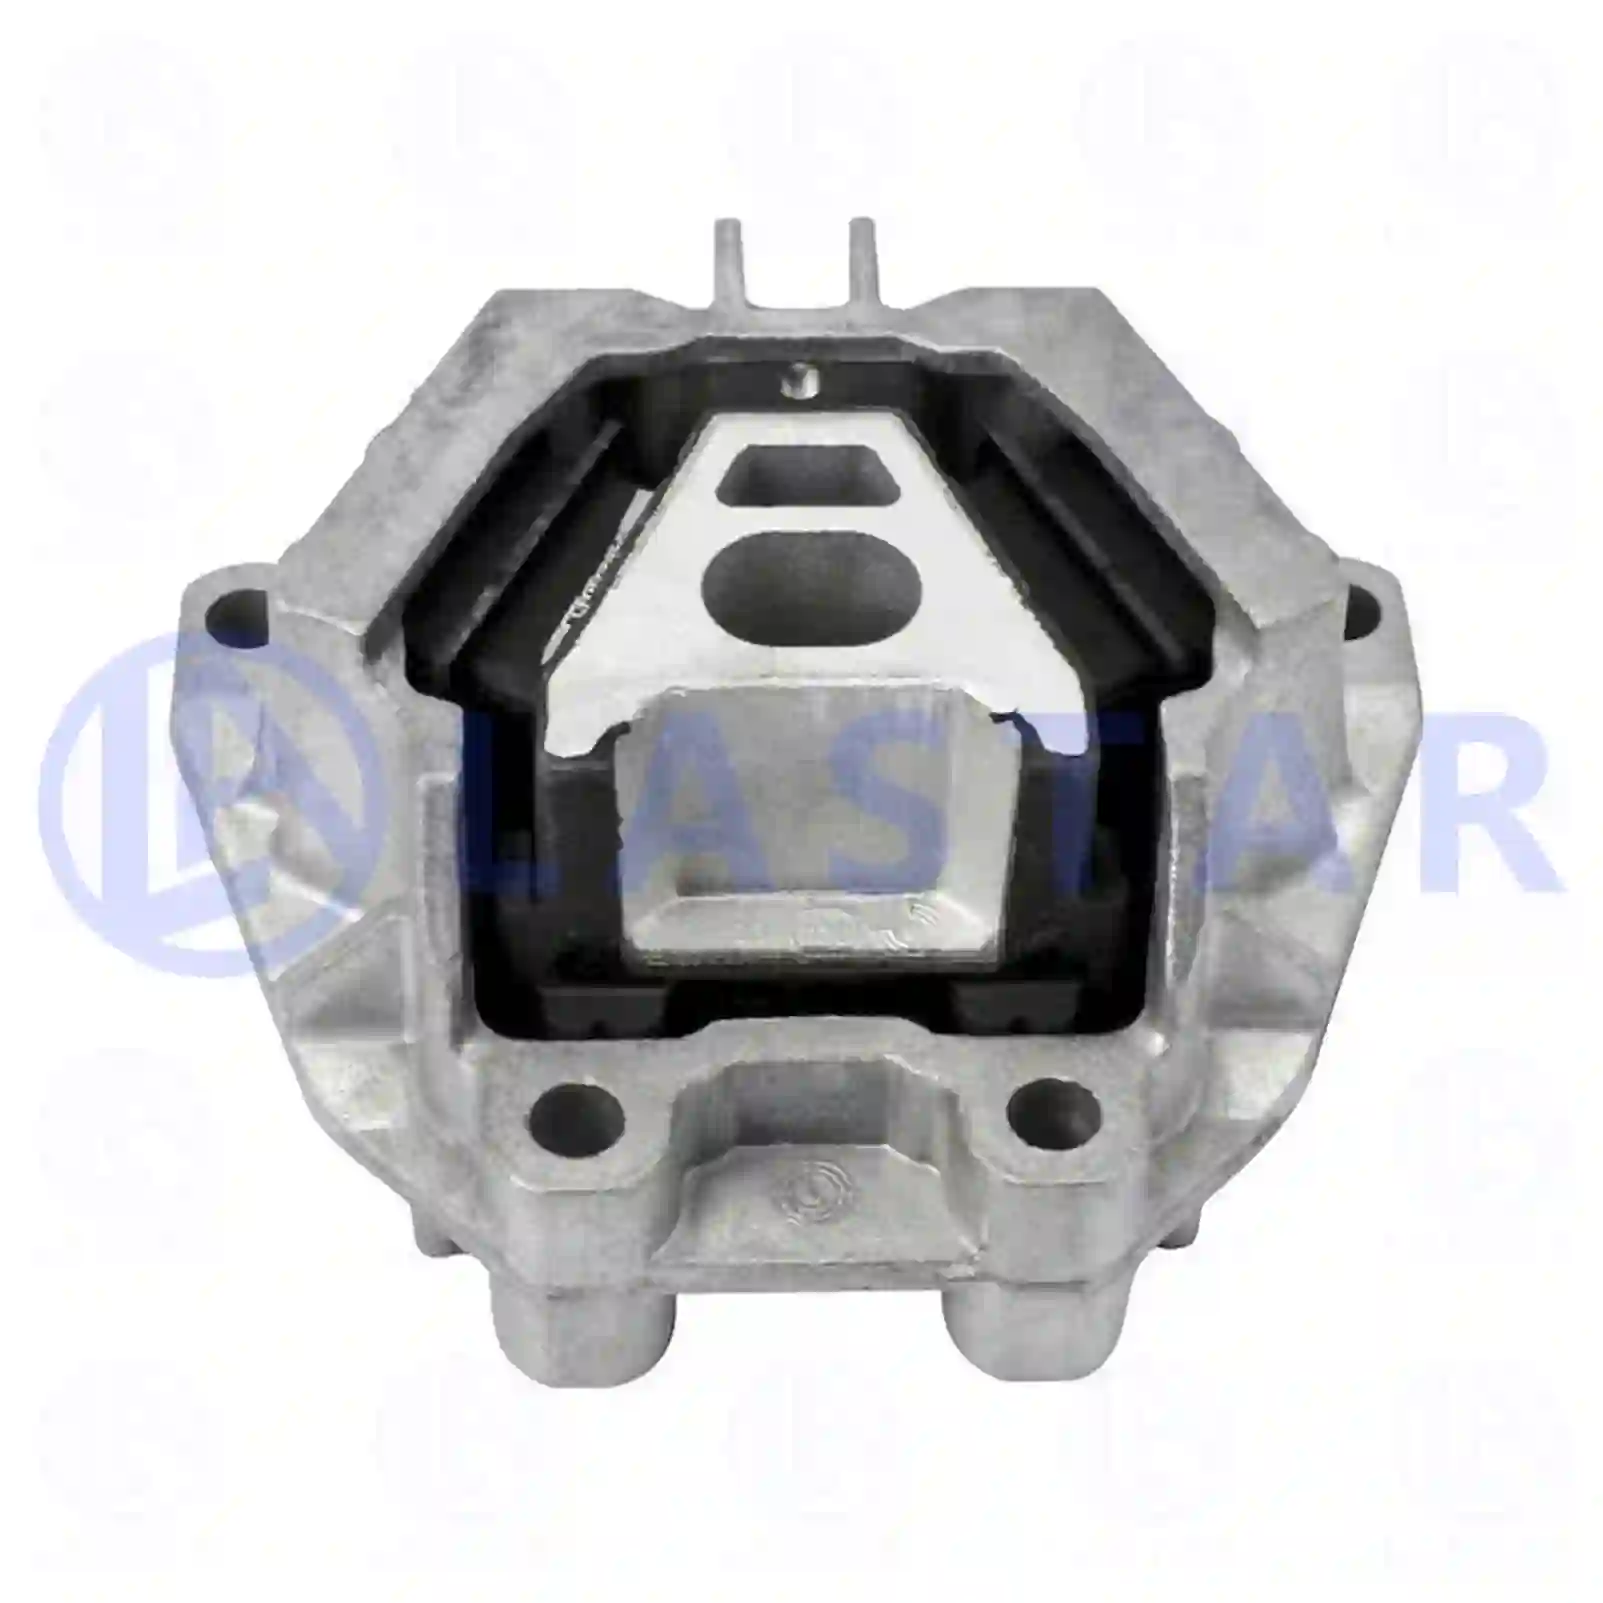 Engine mounting, rear, 77703442, 5010316155, 20501 ||  77703442 Lastar Spare Part | Truck Spare Parts, Auotomotive Spare Parts Engine mounting, rear, 77703442, 5010316155, 20501 ||  77703442 Lastar Spare Part | Truck Spare Parts, Auotomotive Spare Parts